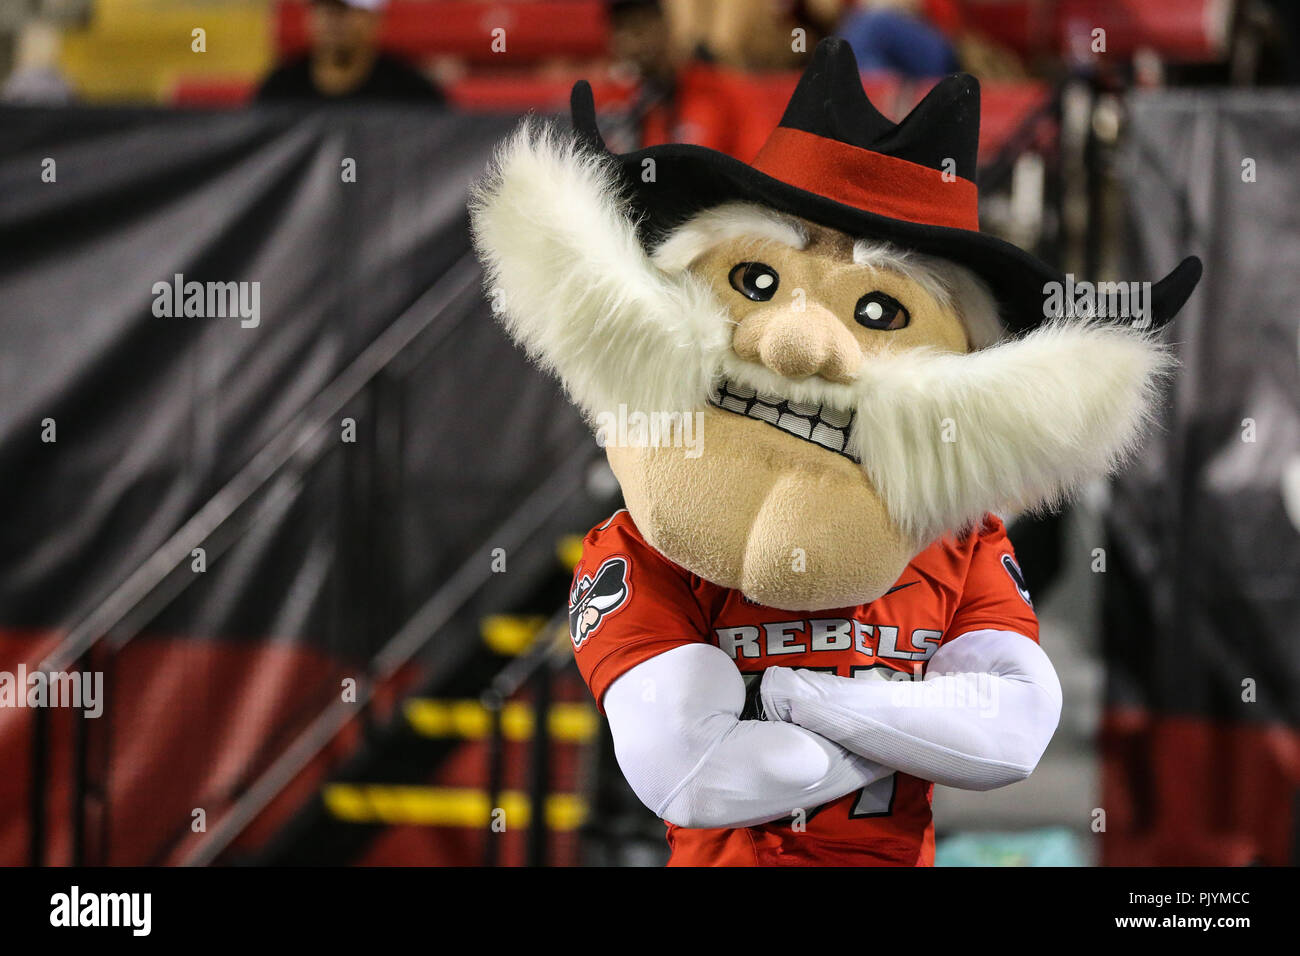 https://c8.alamy.com/comp/PJYMCC/las-vegas-nv-usa-8th-sep-2018-the-unlv-rebels-mascot-hey-reb!-on-the-sidelines-during-the-ncaa-football-game-between-the-utep-miners-and-the-unlv-rebels-at-sam-boyd-stadium-in-las-vegas-nv-the-unlv-rebels-defeated-the-utep-miners-52-to-24christopher-trimcsmalamy-live-news-PJYMCC.jpg